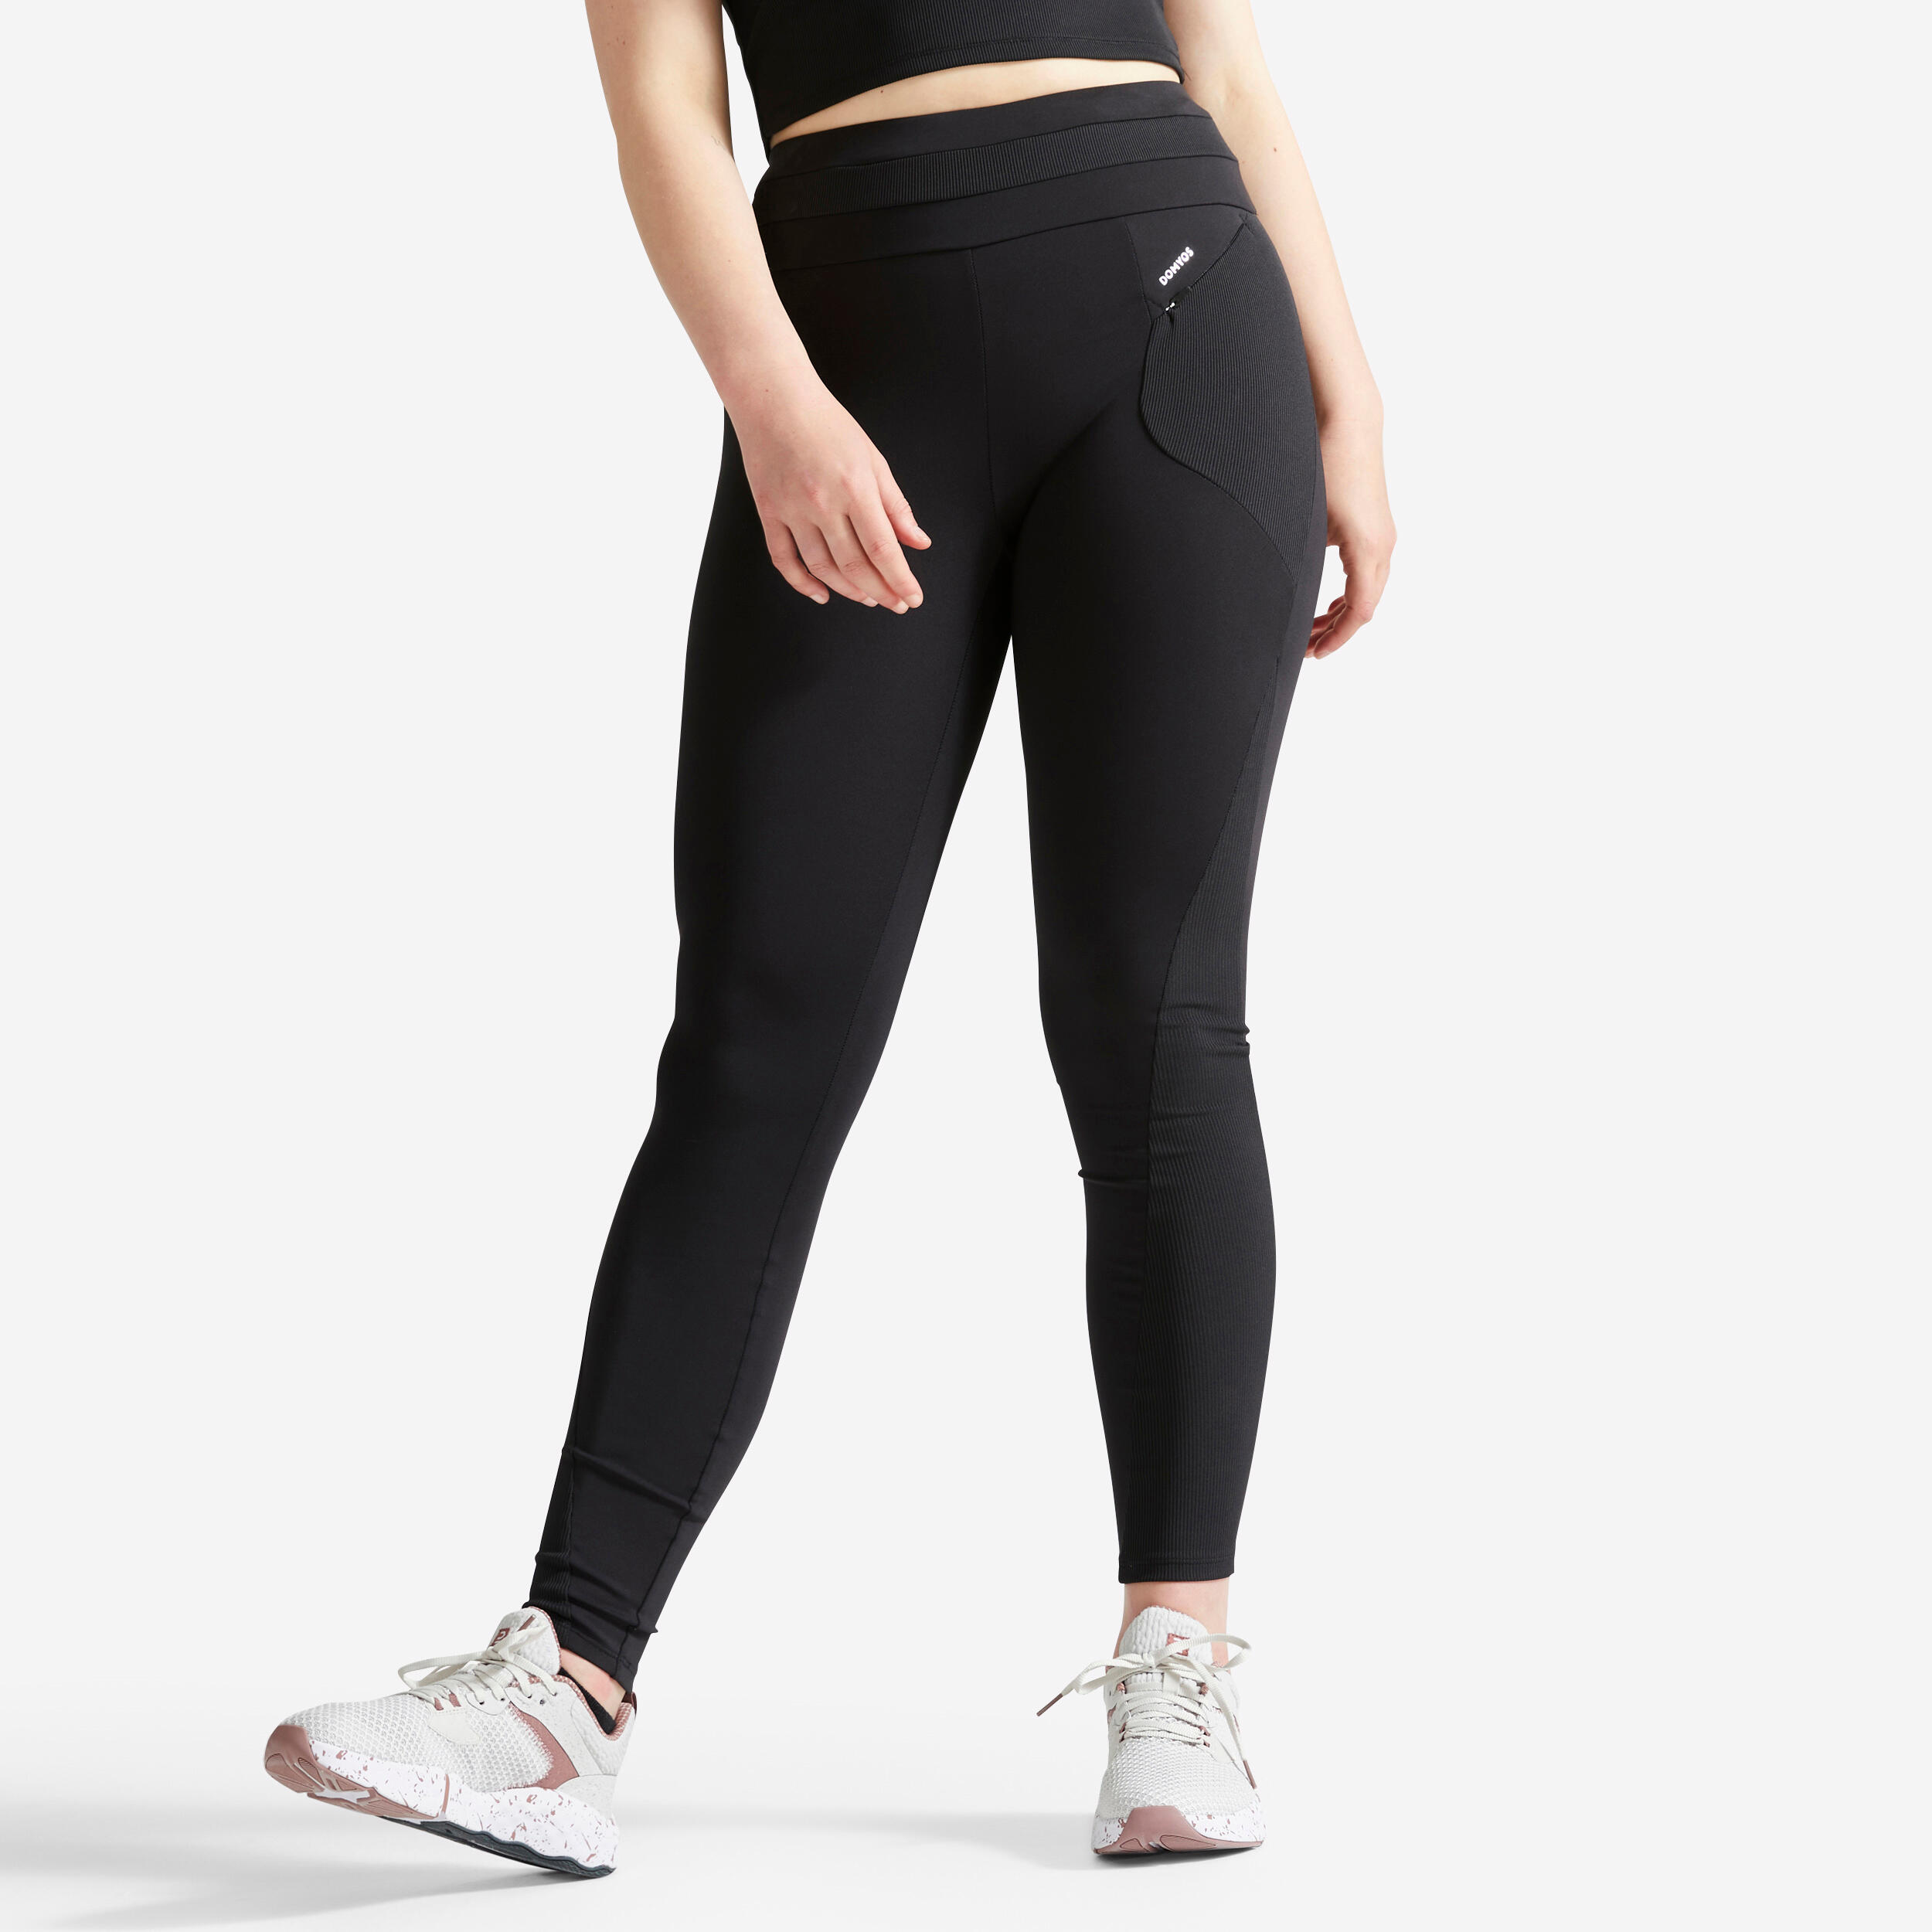 Shop Sports Direct Sports Leggings With Pockets for Women up to 80% Off